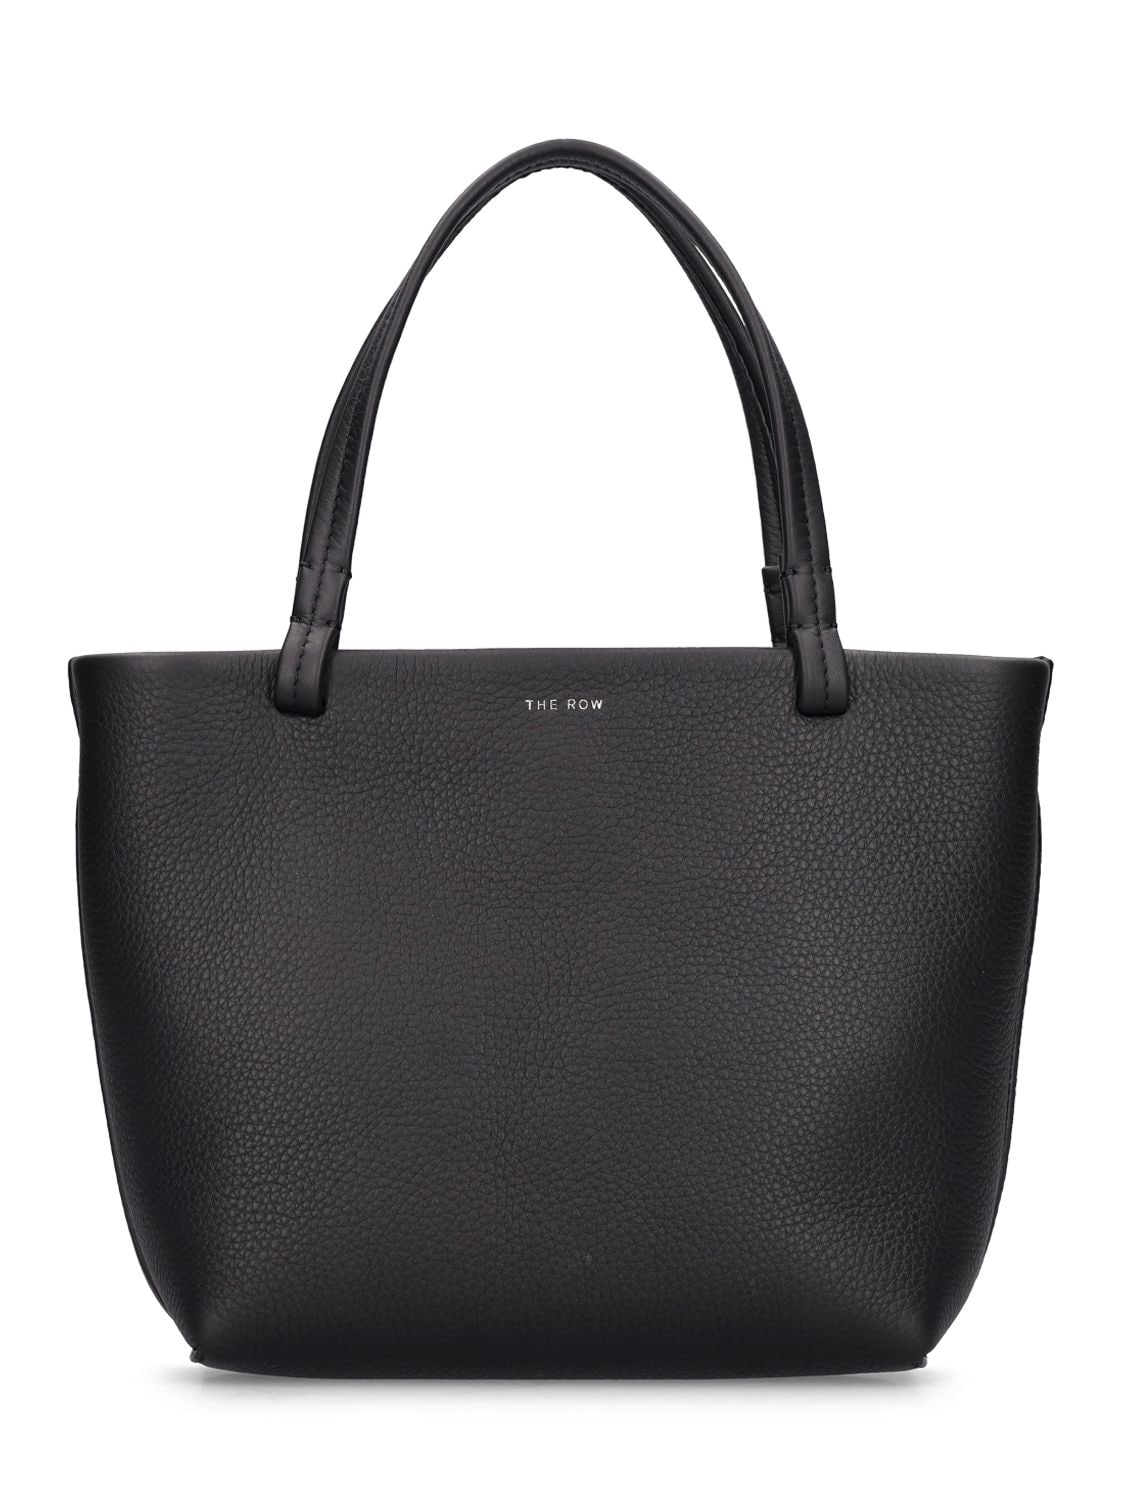 THE ROW SMALL PARK LEATHER TOTE BAG